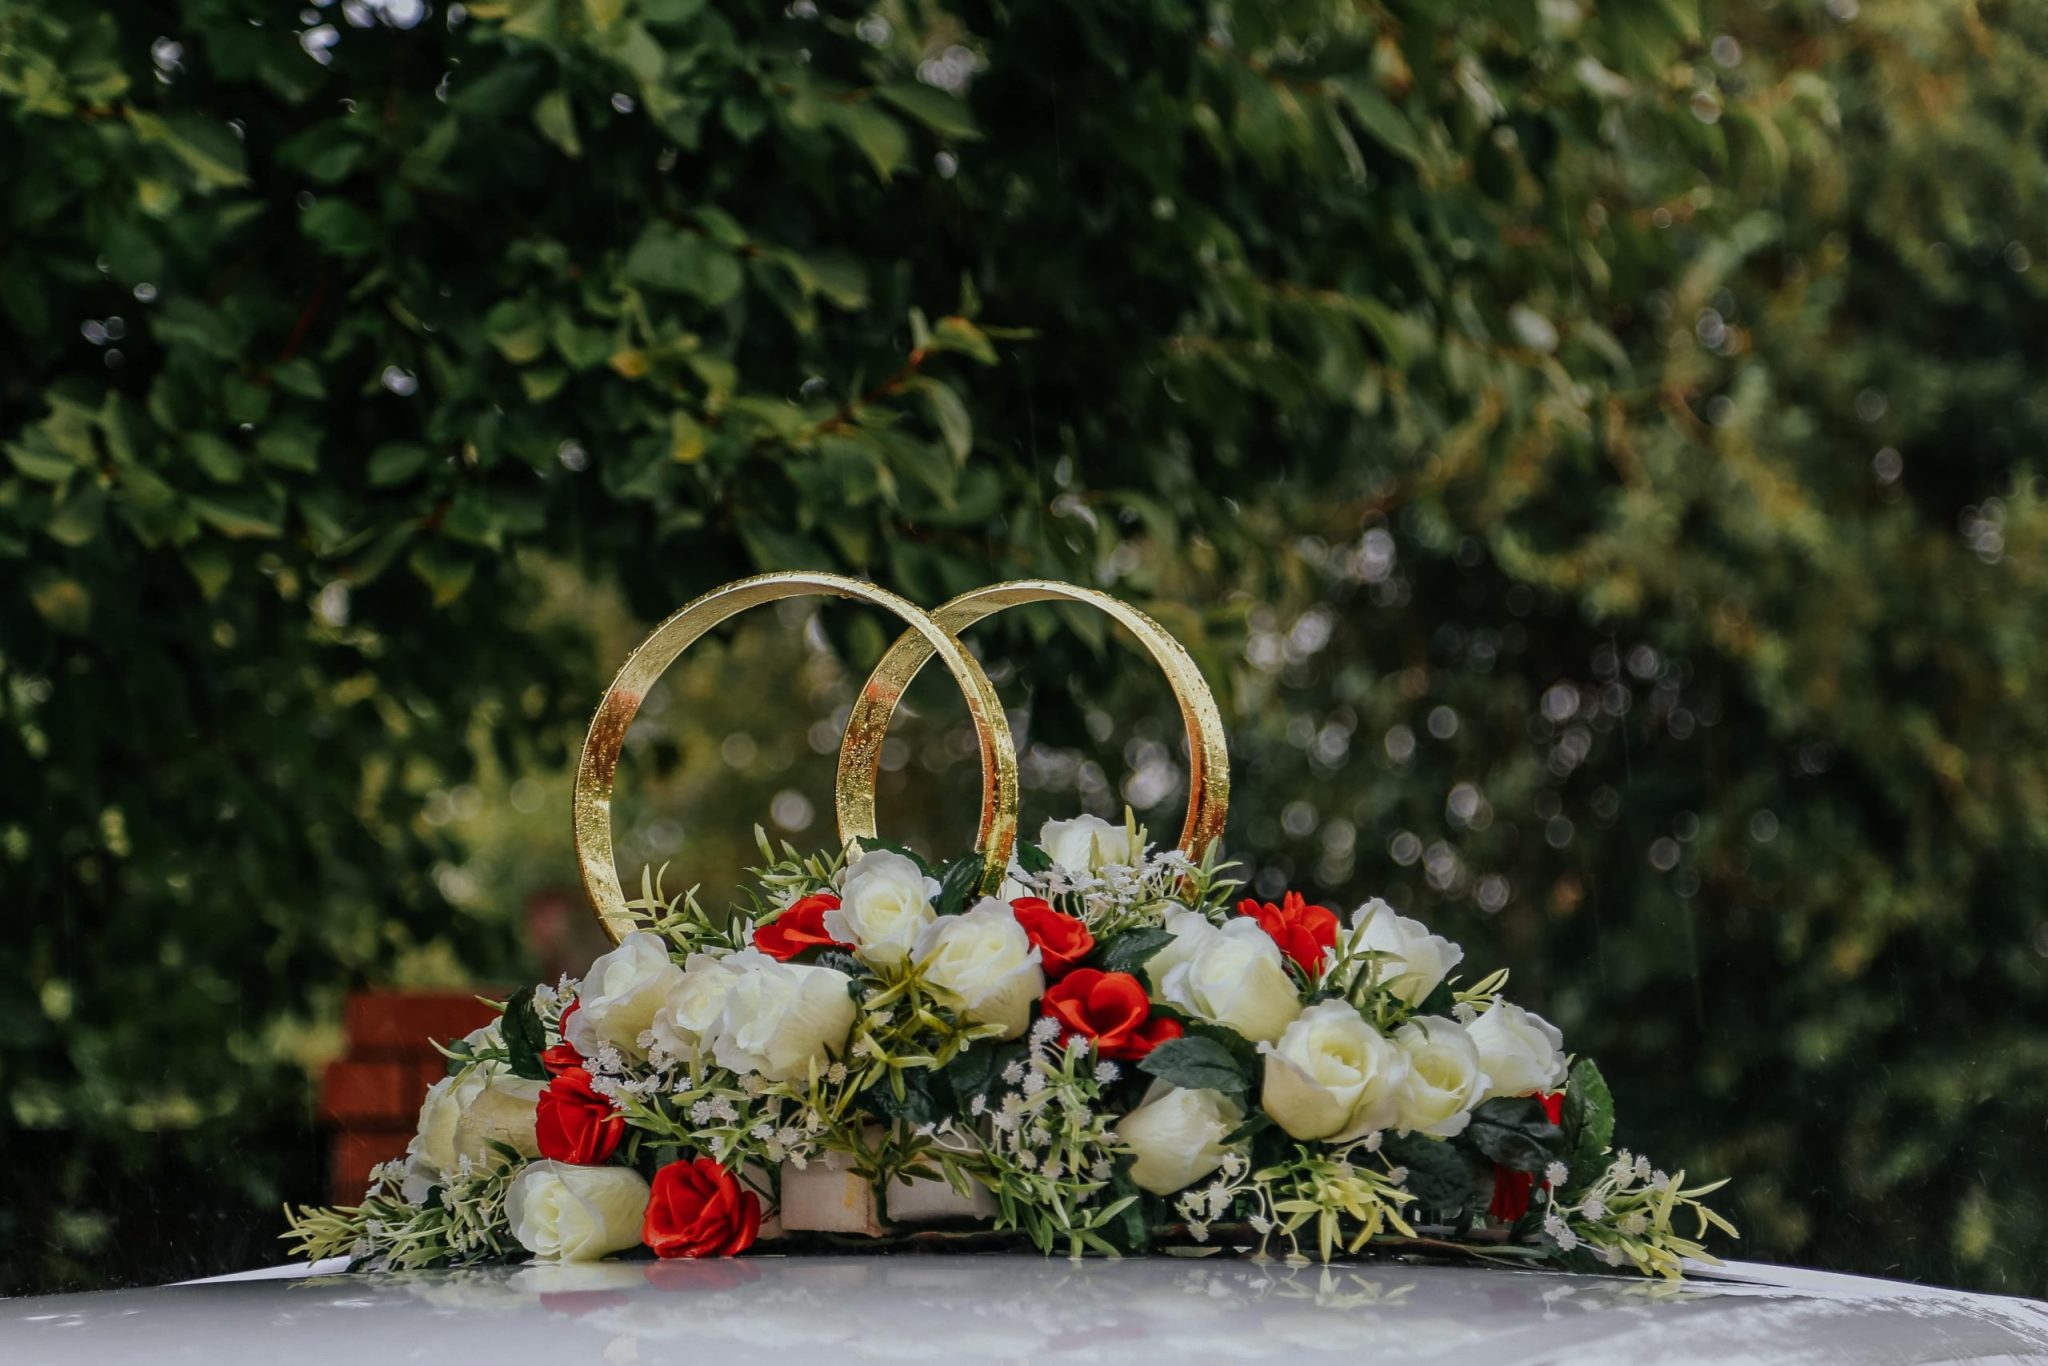 engagement party decoration consisting of two rings and flowers